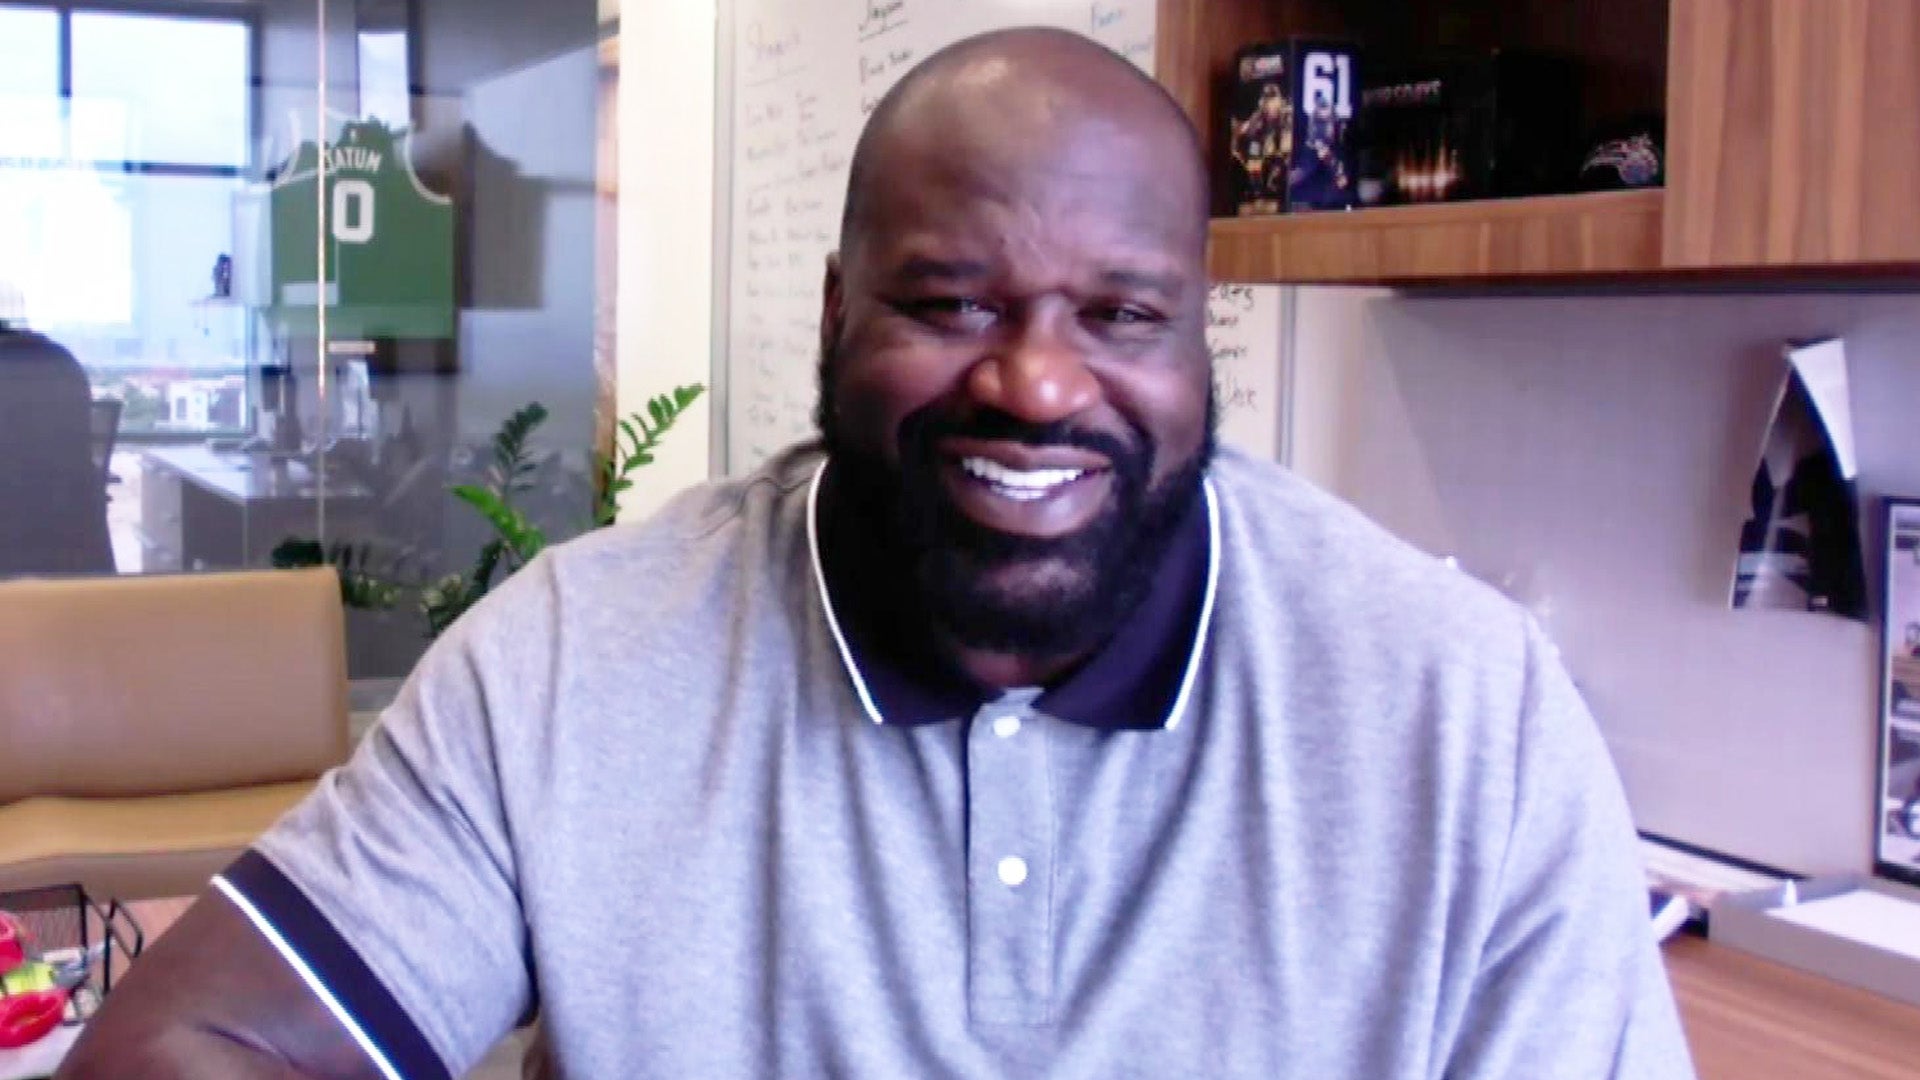 A Look Back At Shaquille O'Neal's Most Iconic & Infamous Moments